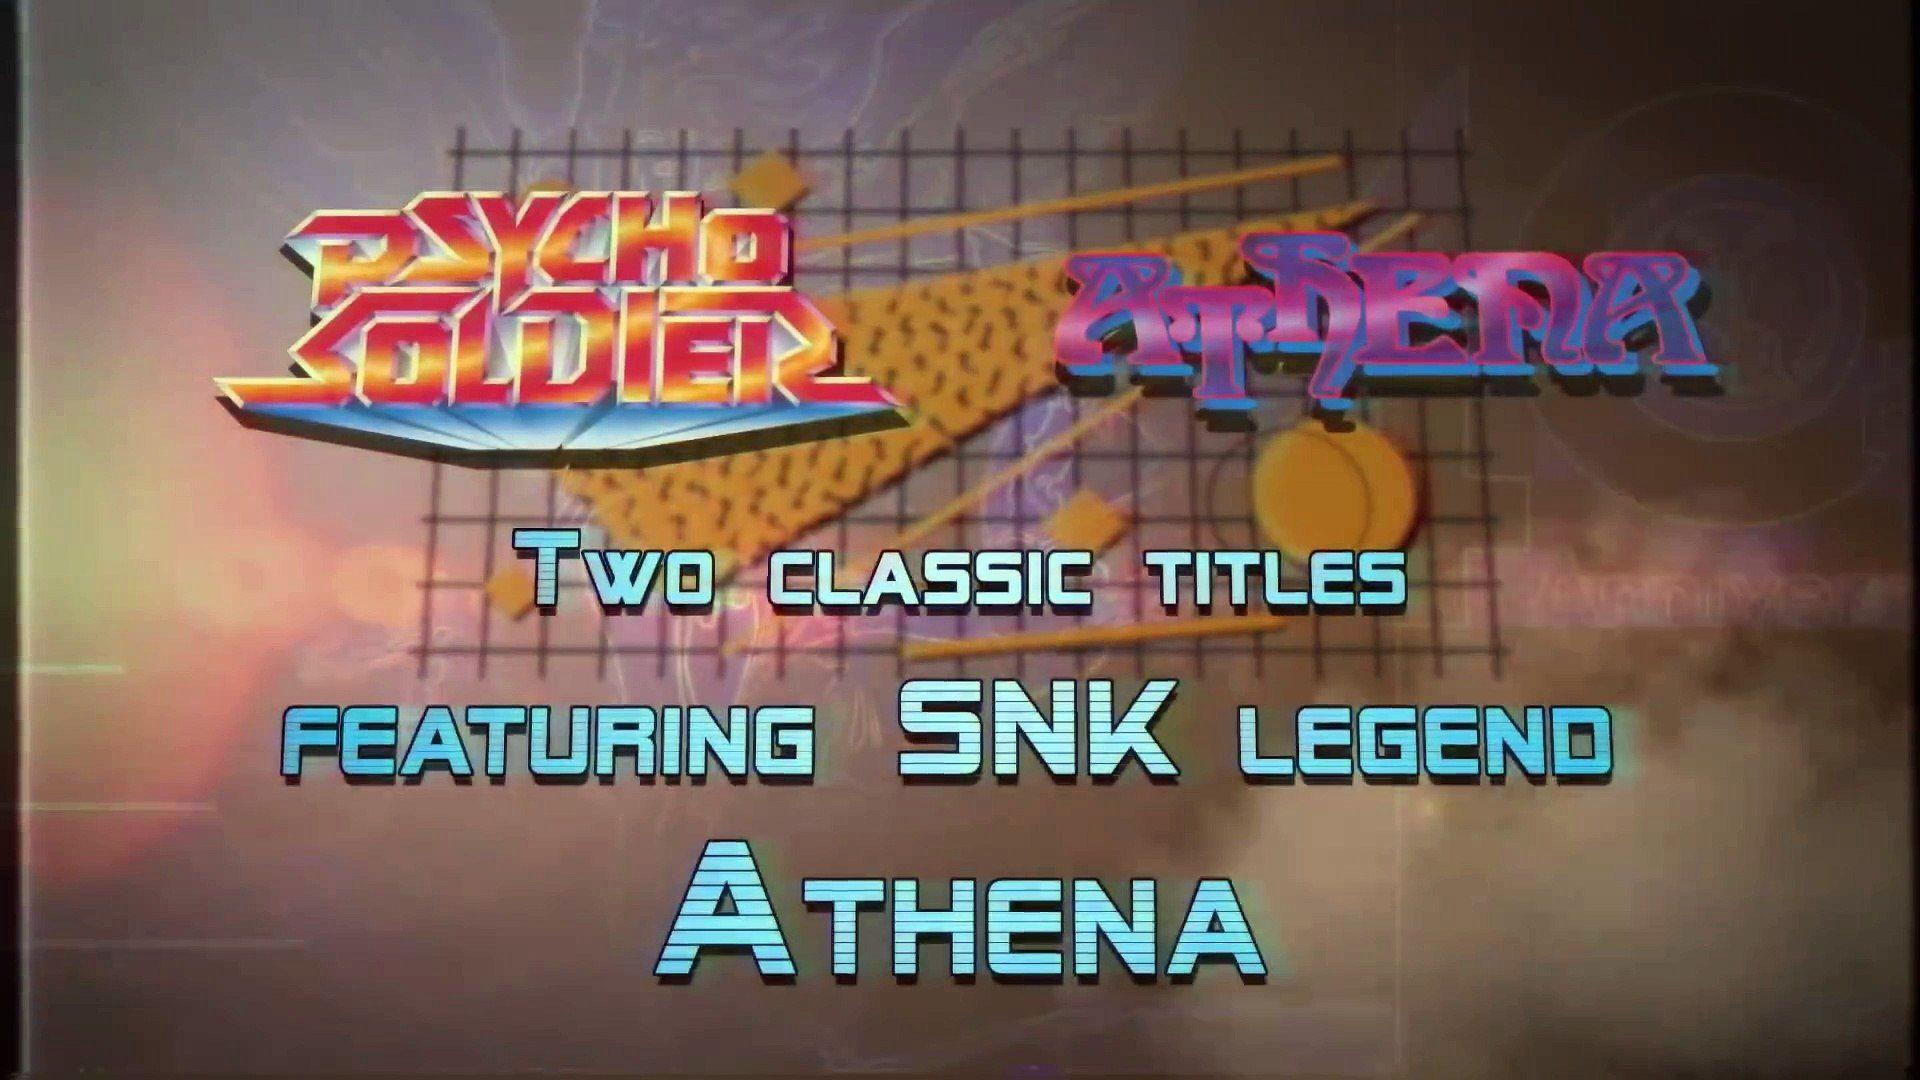 Psycho Soldier and Athena 40th Anniversary Collection